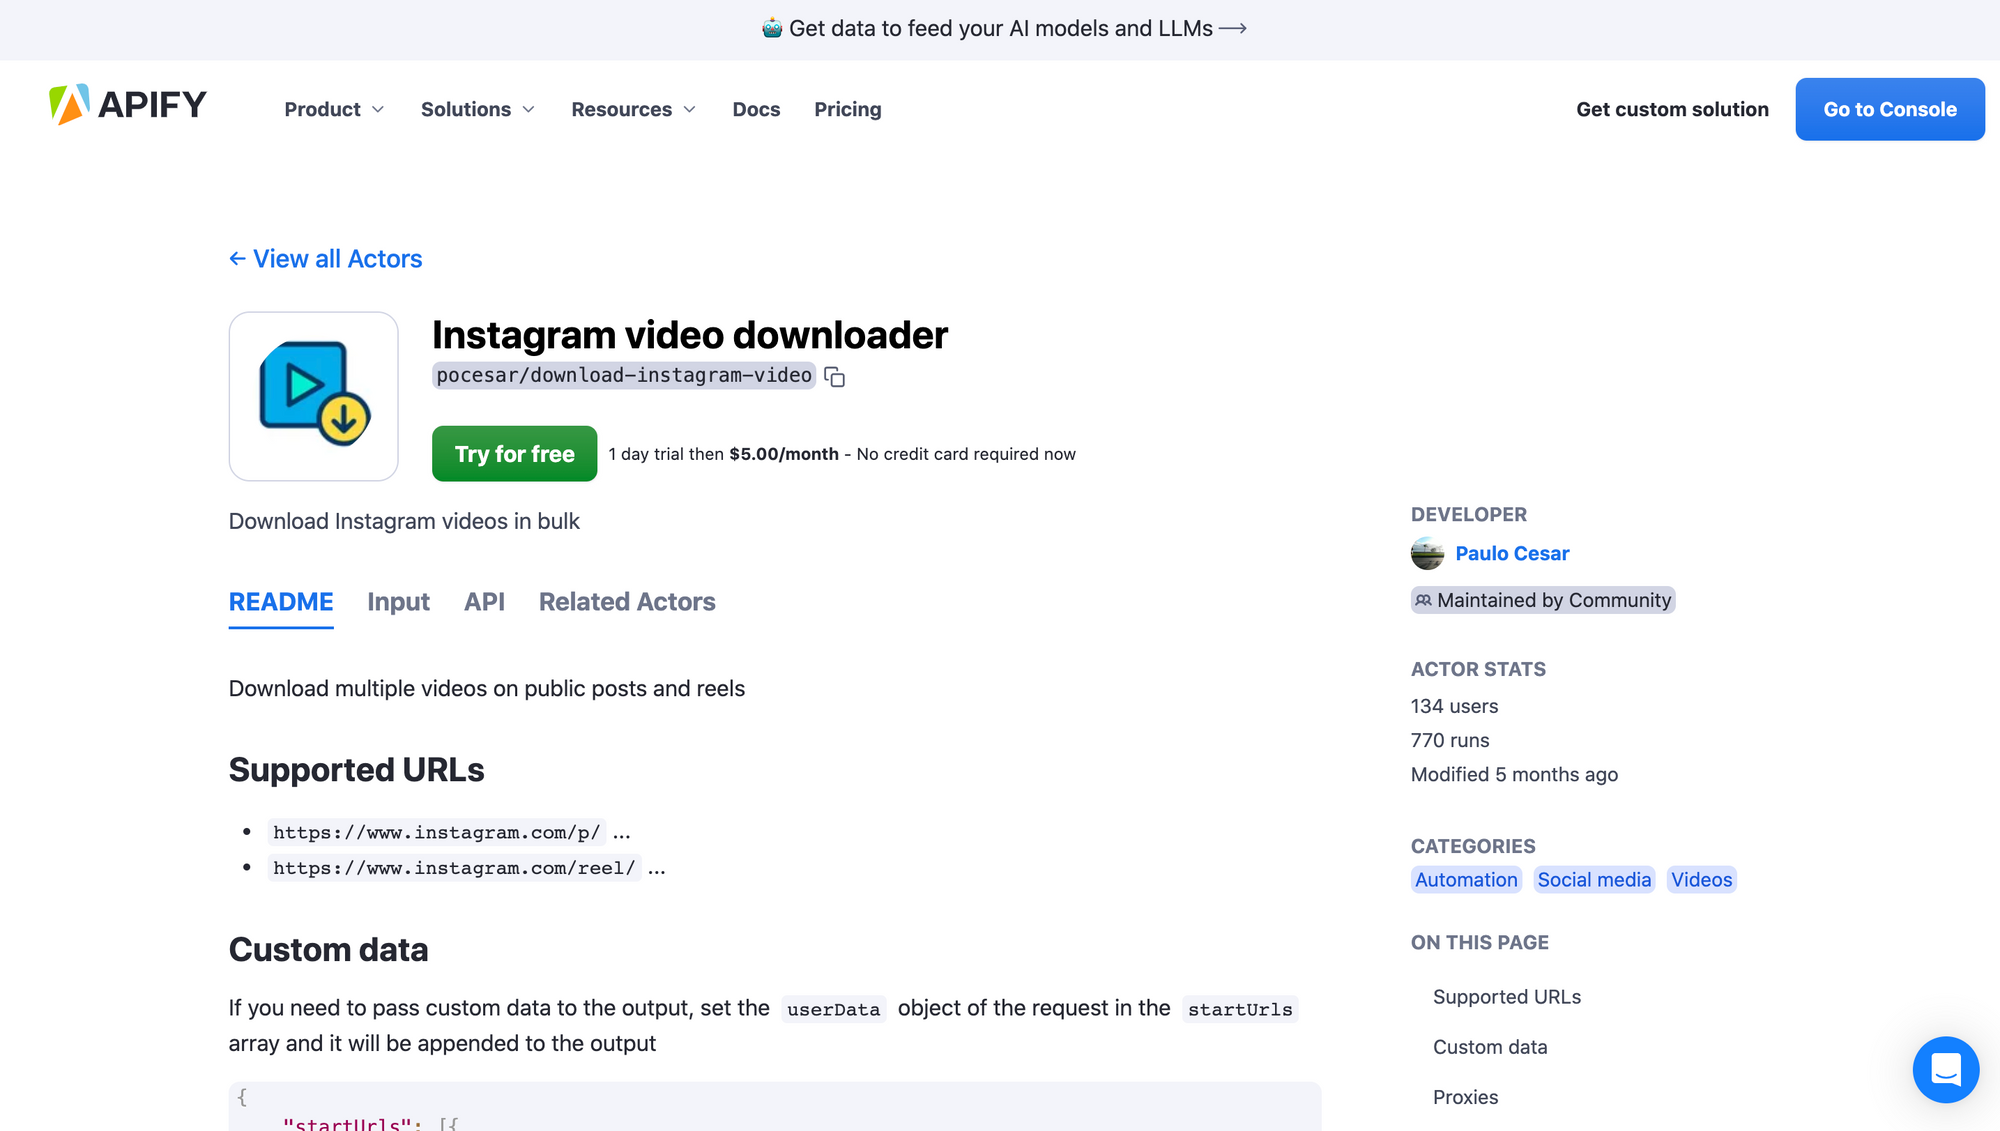 Instagram video downloader on Apify Store is maintained by Community